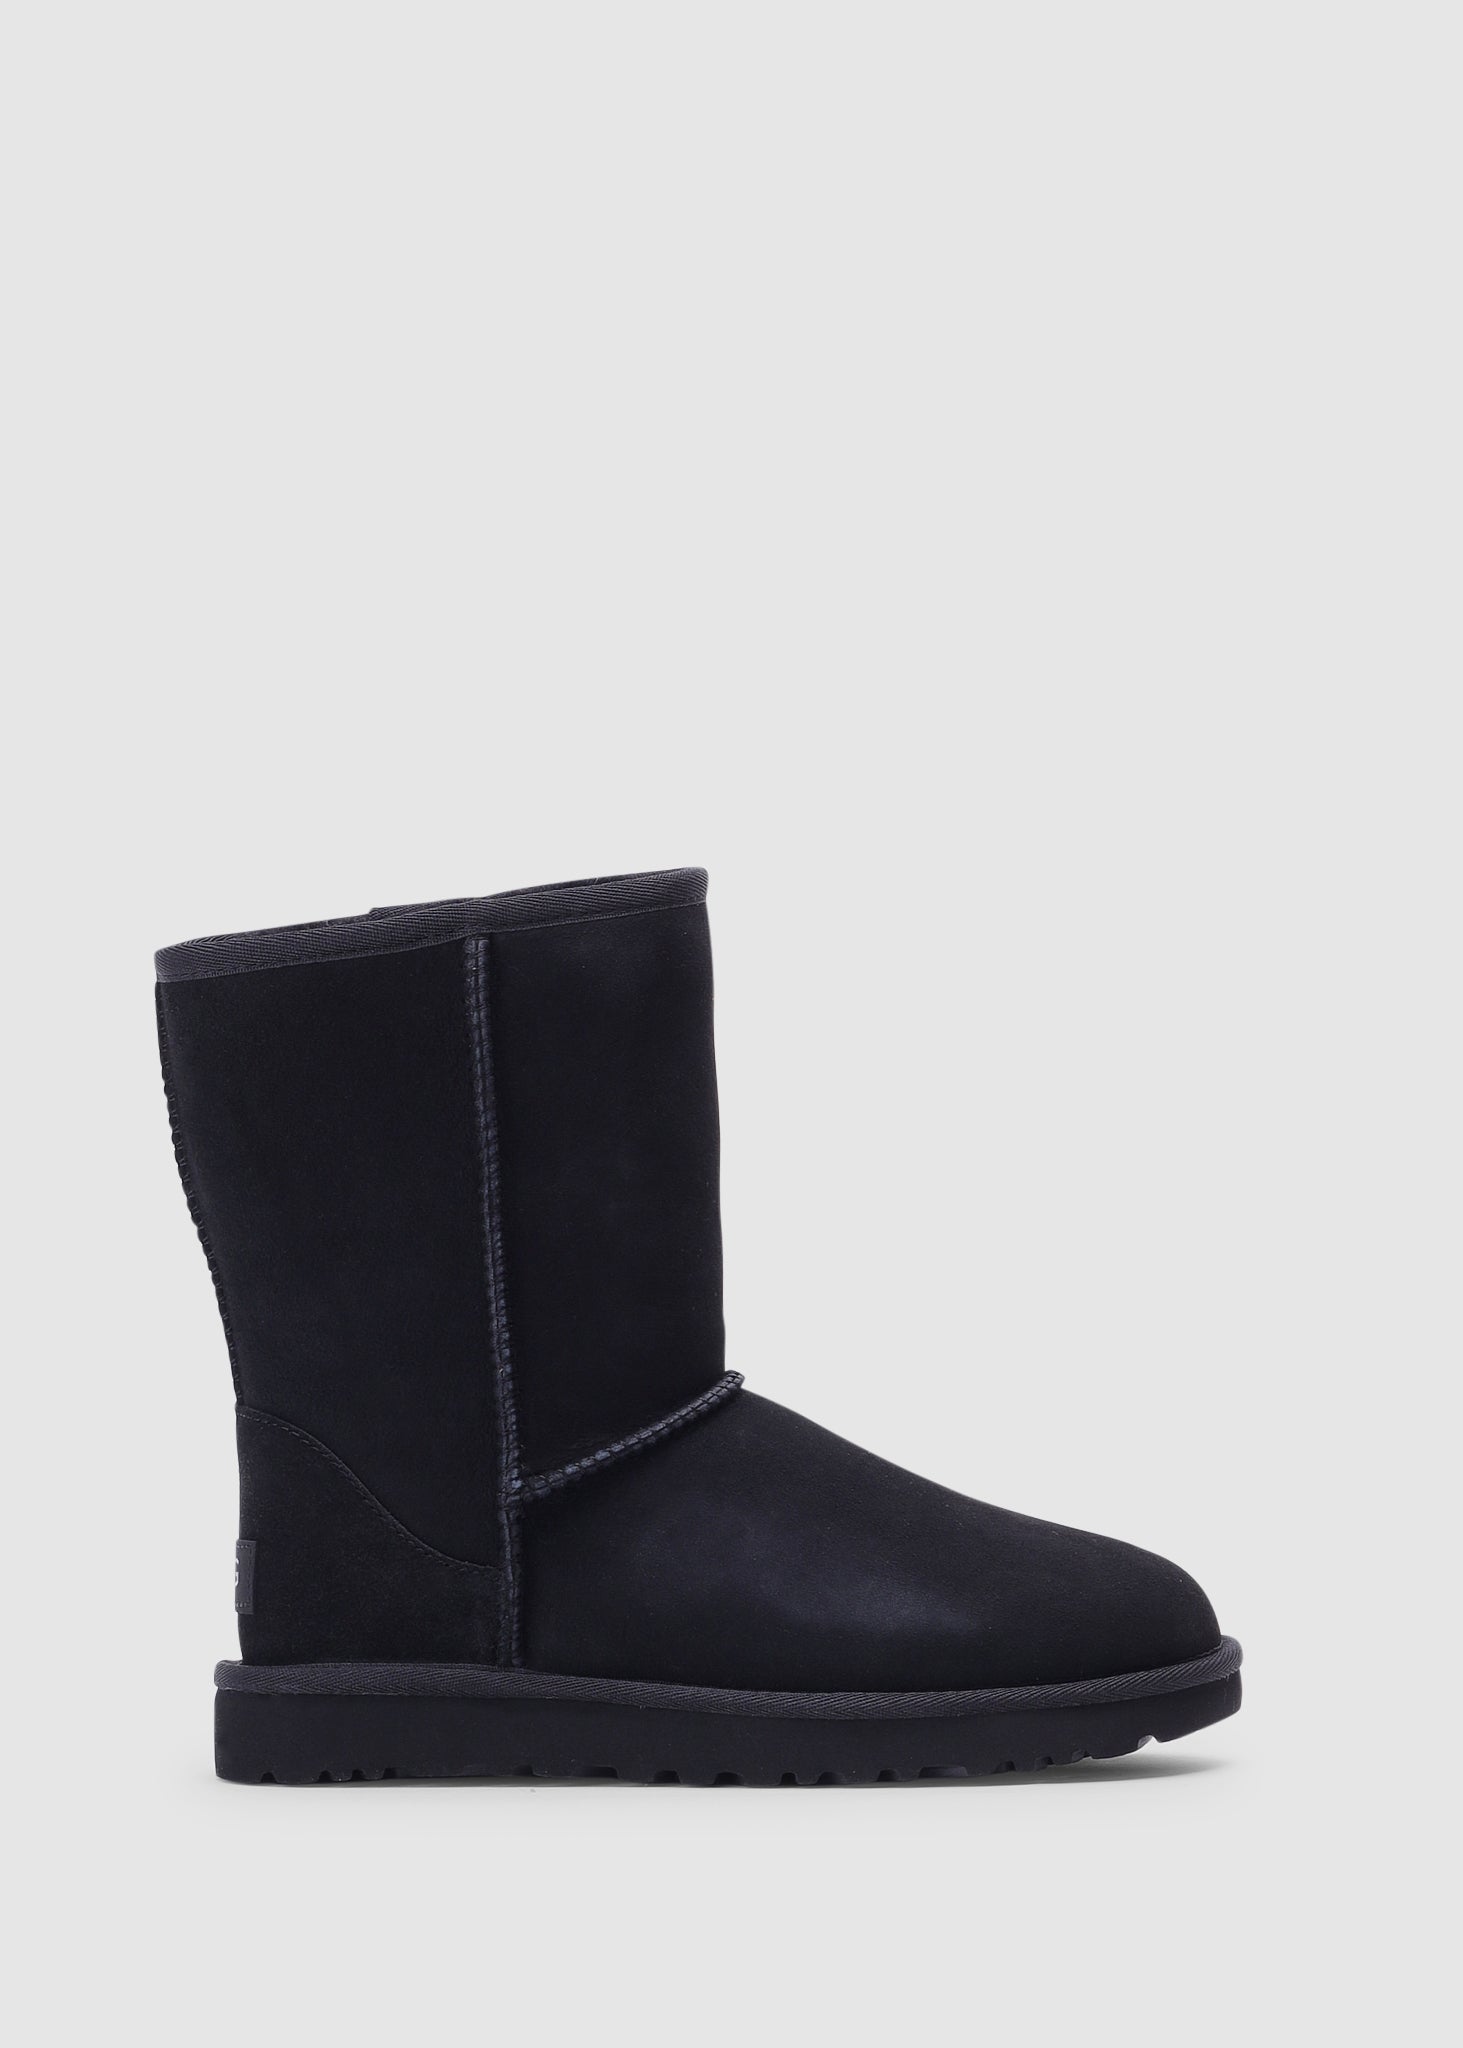 Image of Ugg Womens Classic Short II Boots In Black